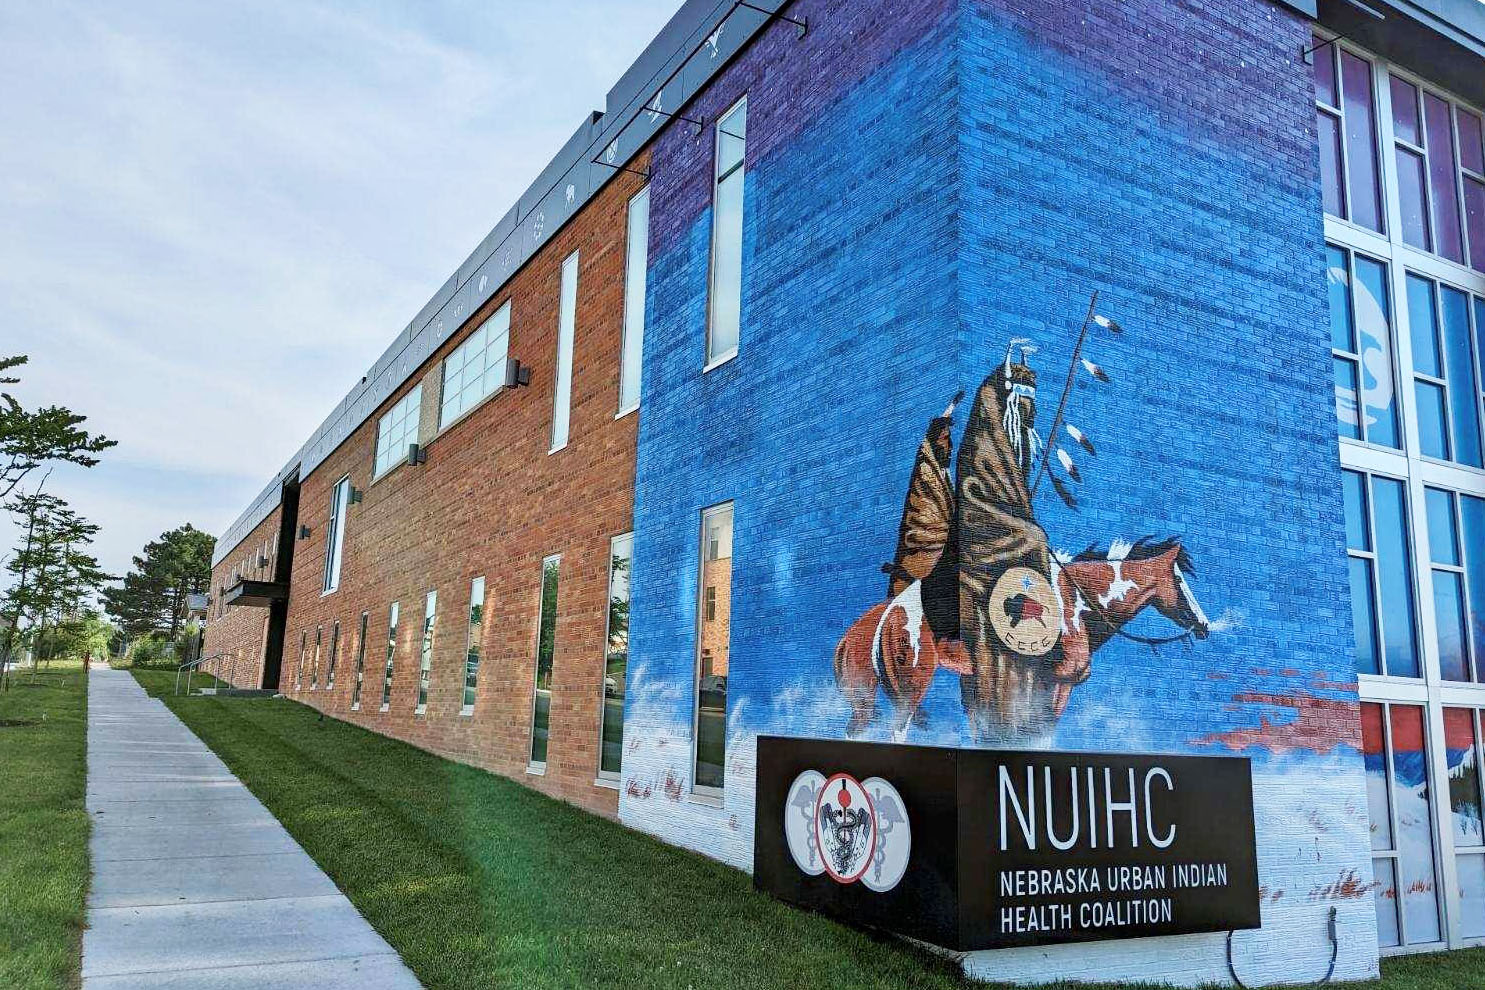 The NUIHC Health and Wellness Clinic opens to the community on Aug&period; 7&period; Located at 23rd and N streets in South Omaha at NUIHC’s comprehensive community center&comma; the clinic will have UNMC College of Nursing faculty providing the advanced practice clinical services&period;